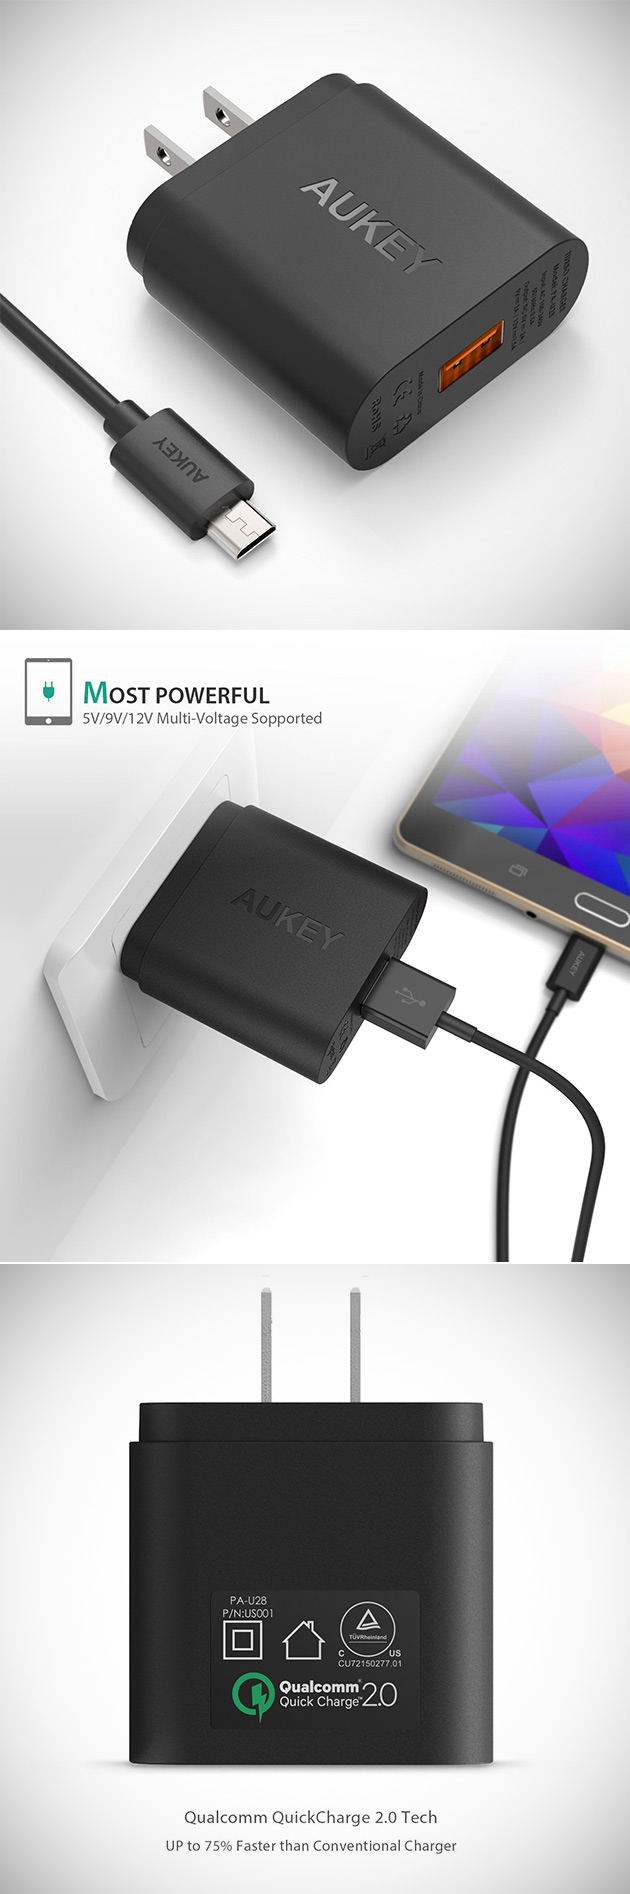 Aukey Quick Charge 2.0